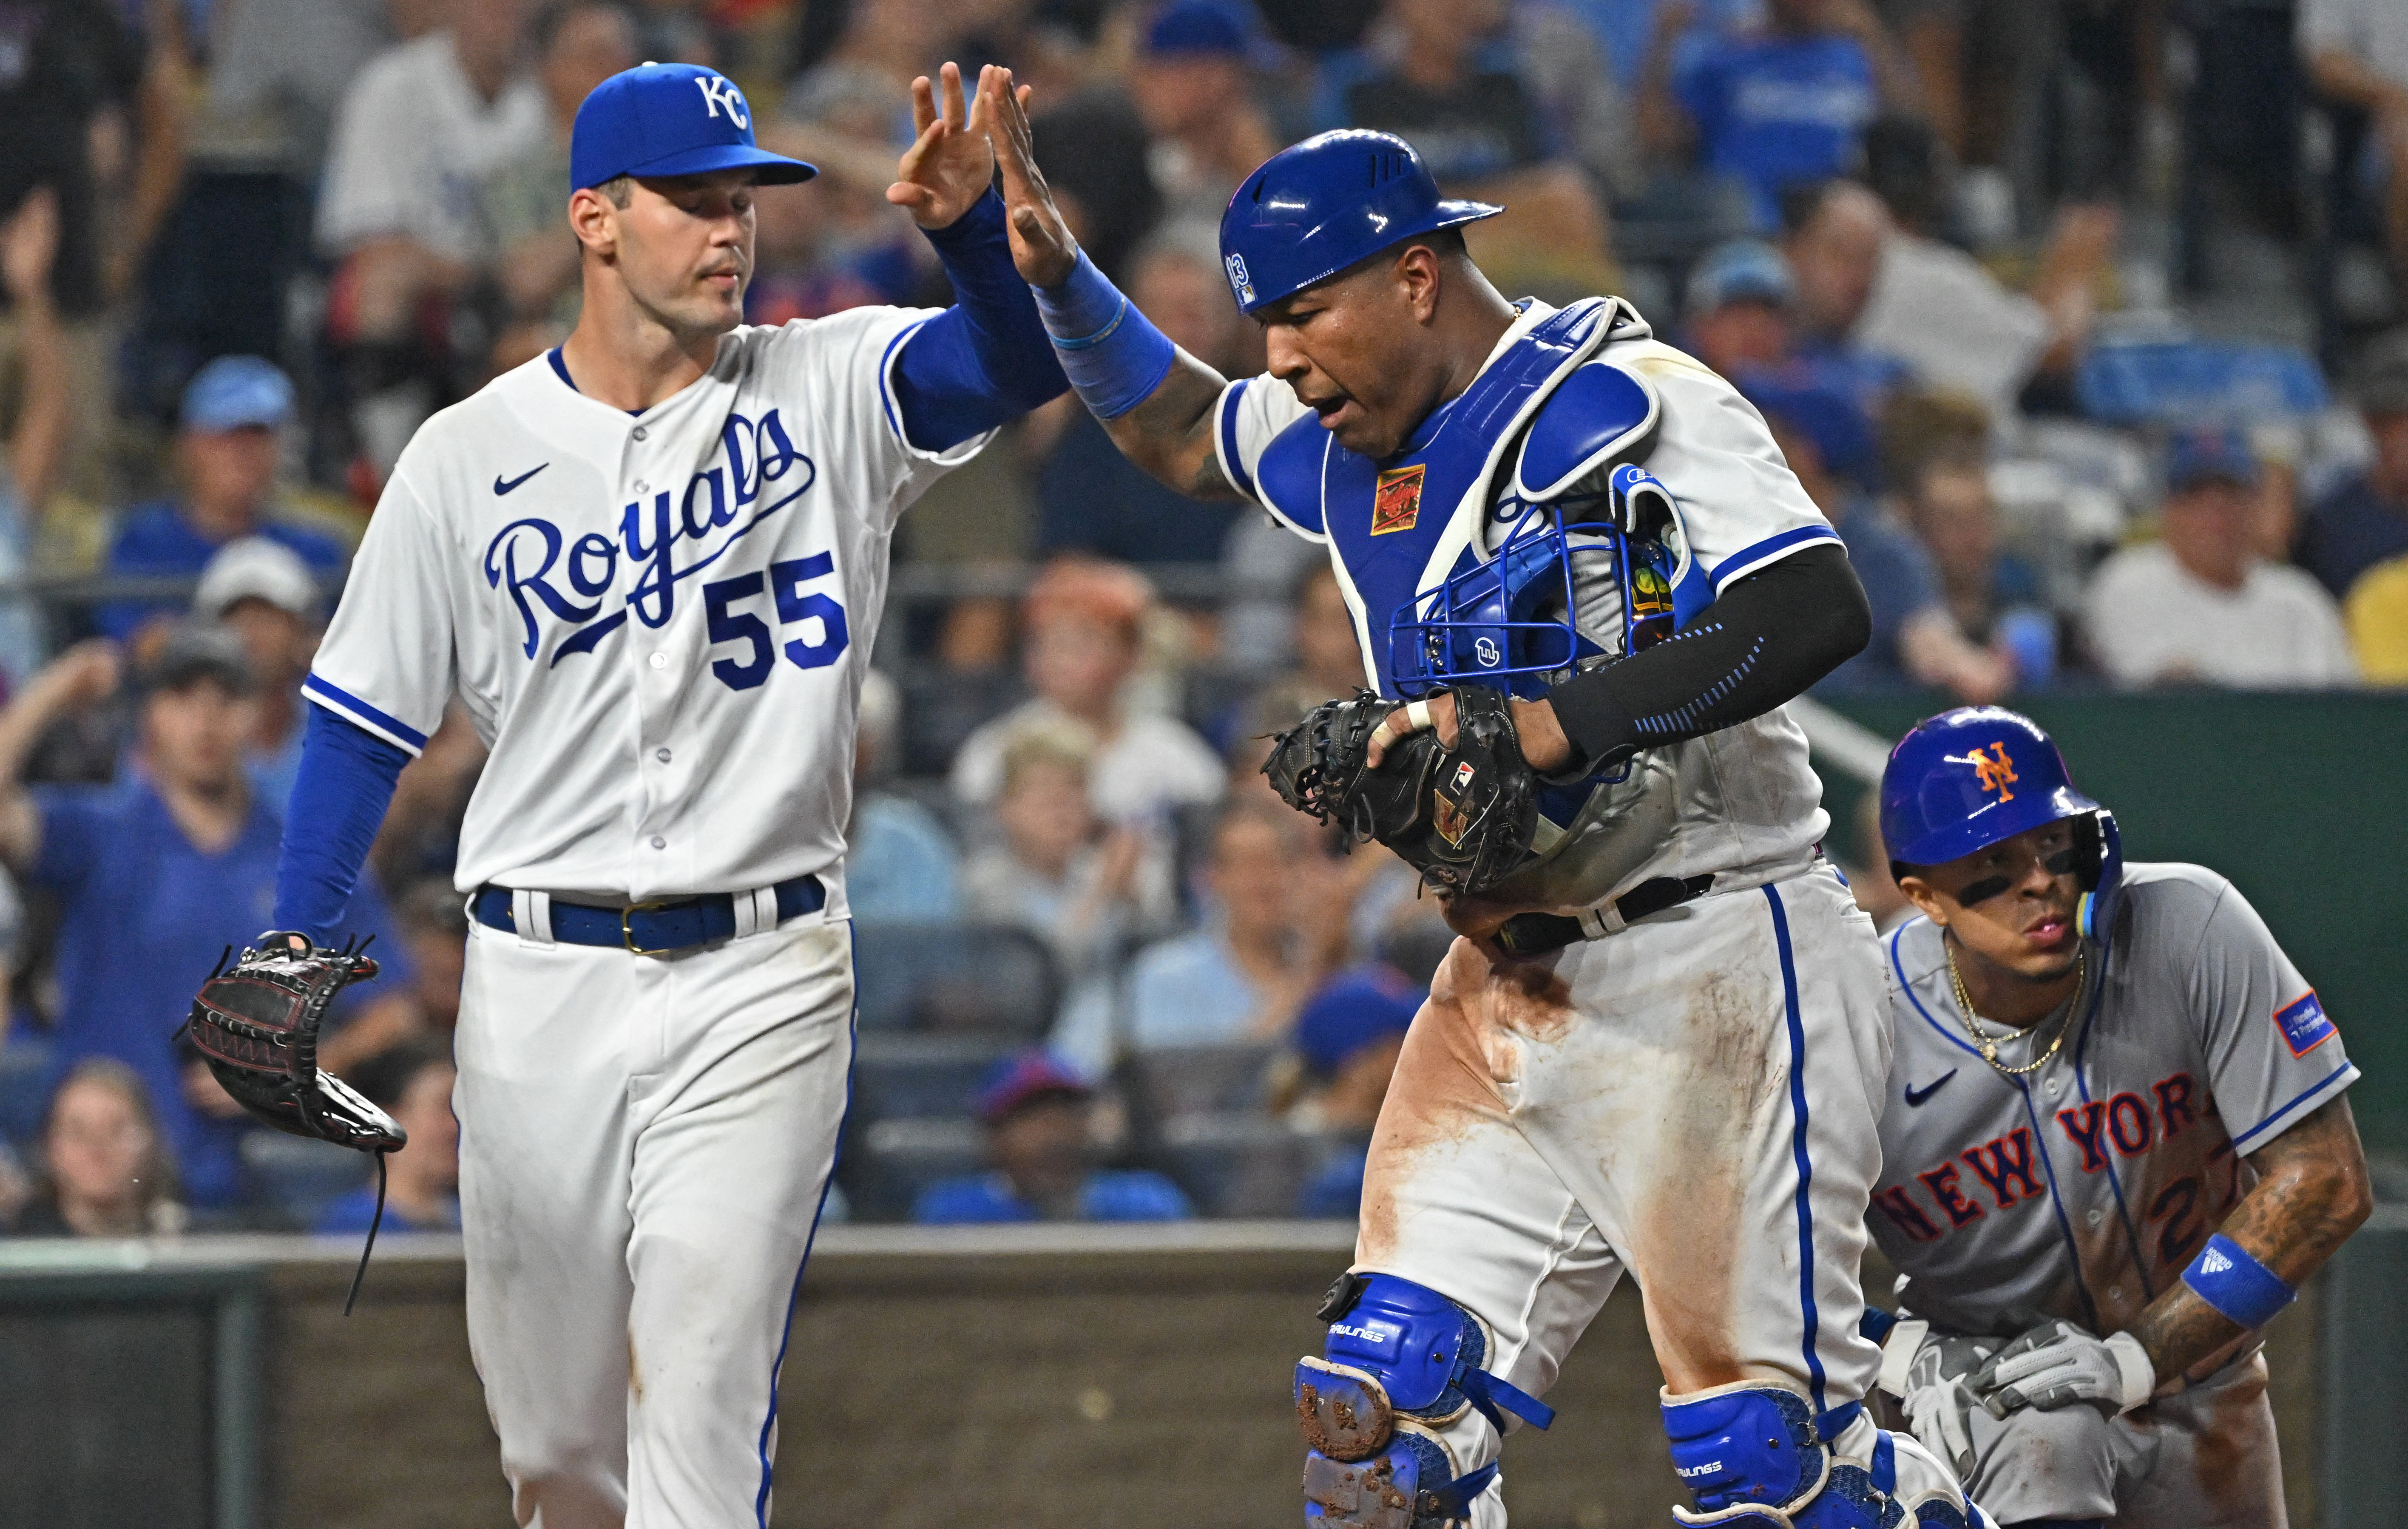 Mets get historically swept by Royals after trade deadline sale